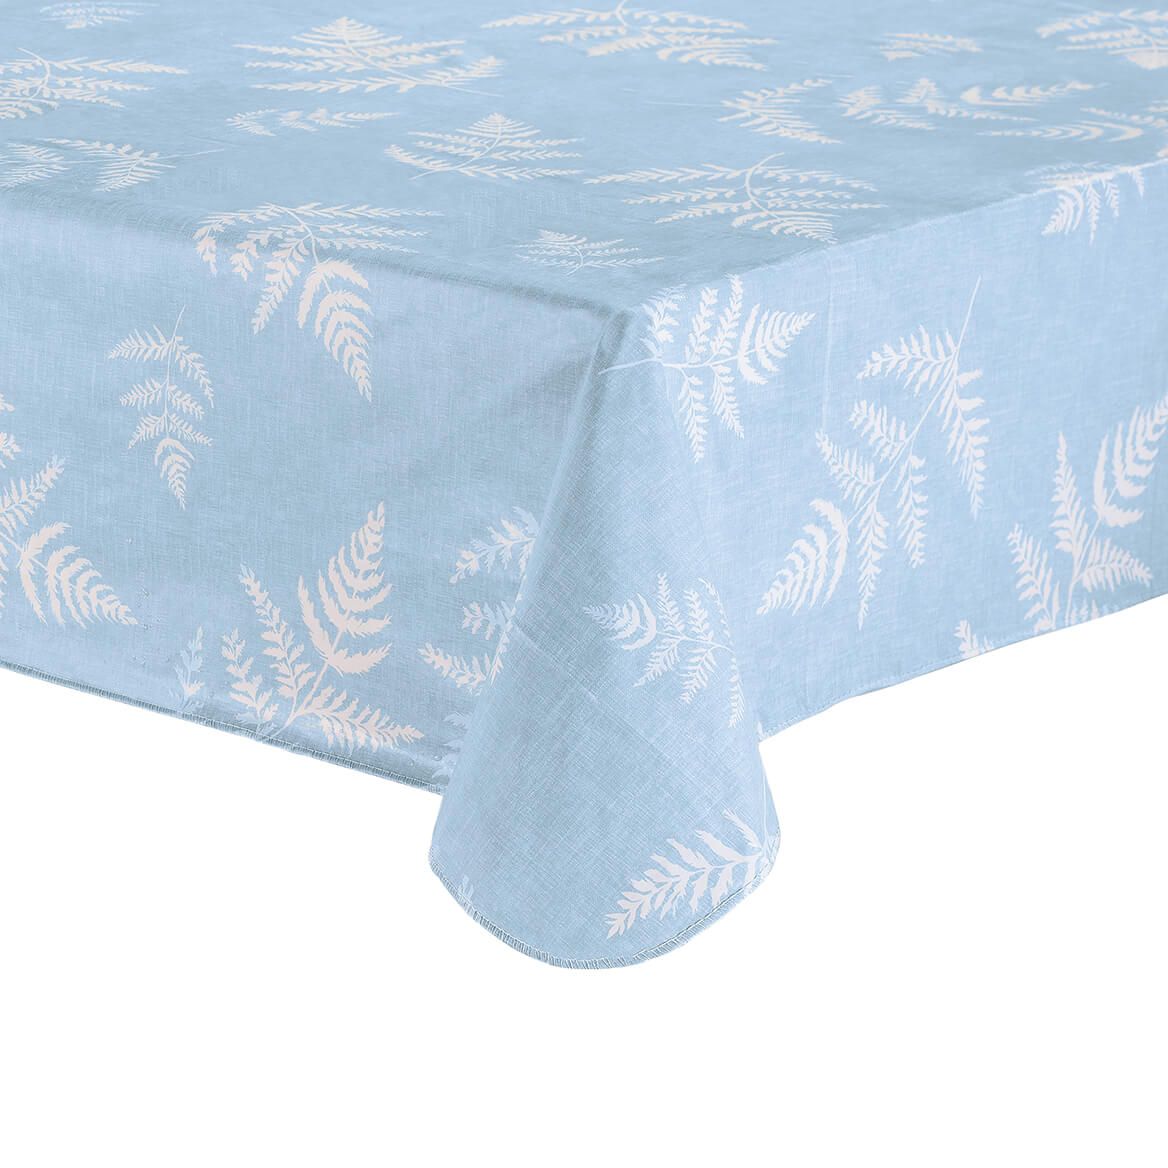 Fern Vinyl Table Cover by Homestyle Kitchen + '-' + 366988